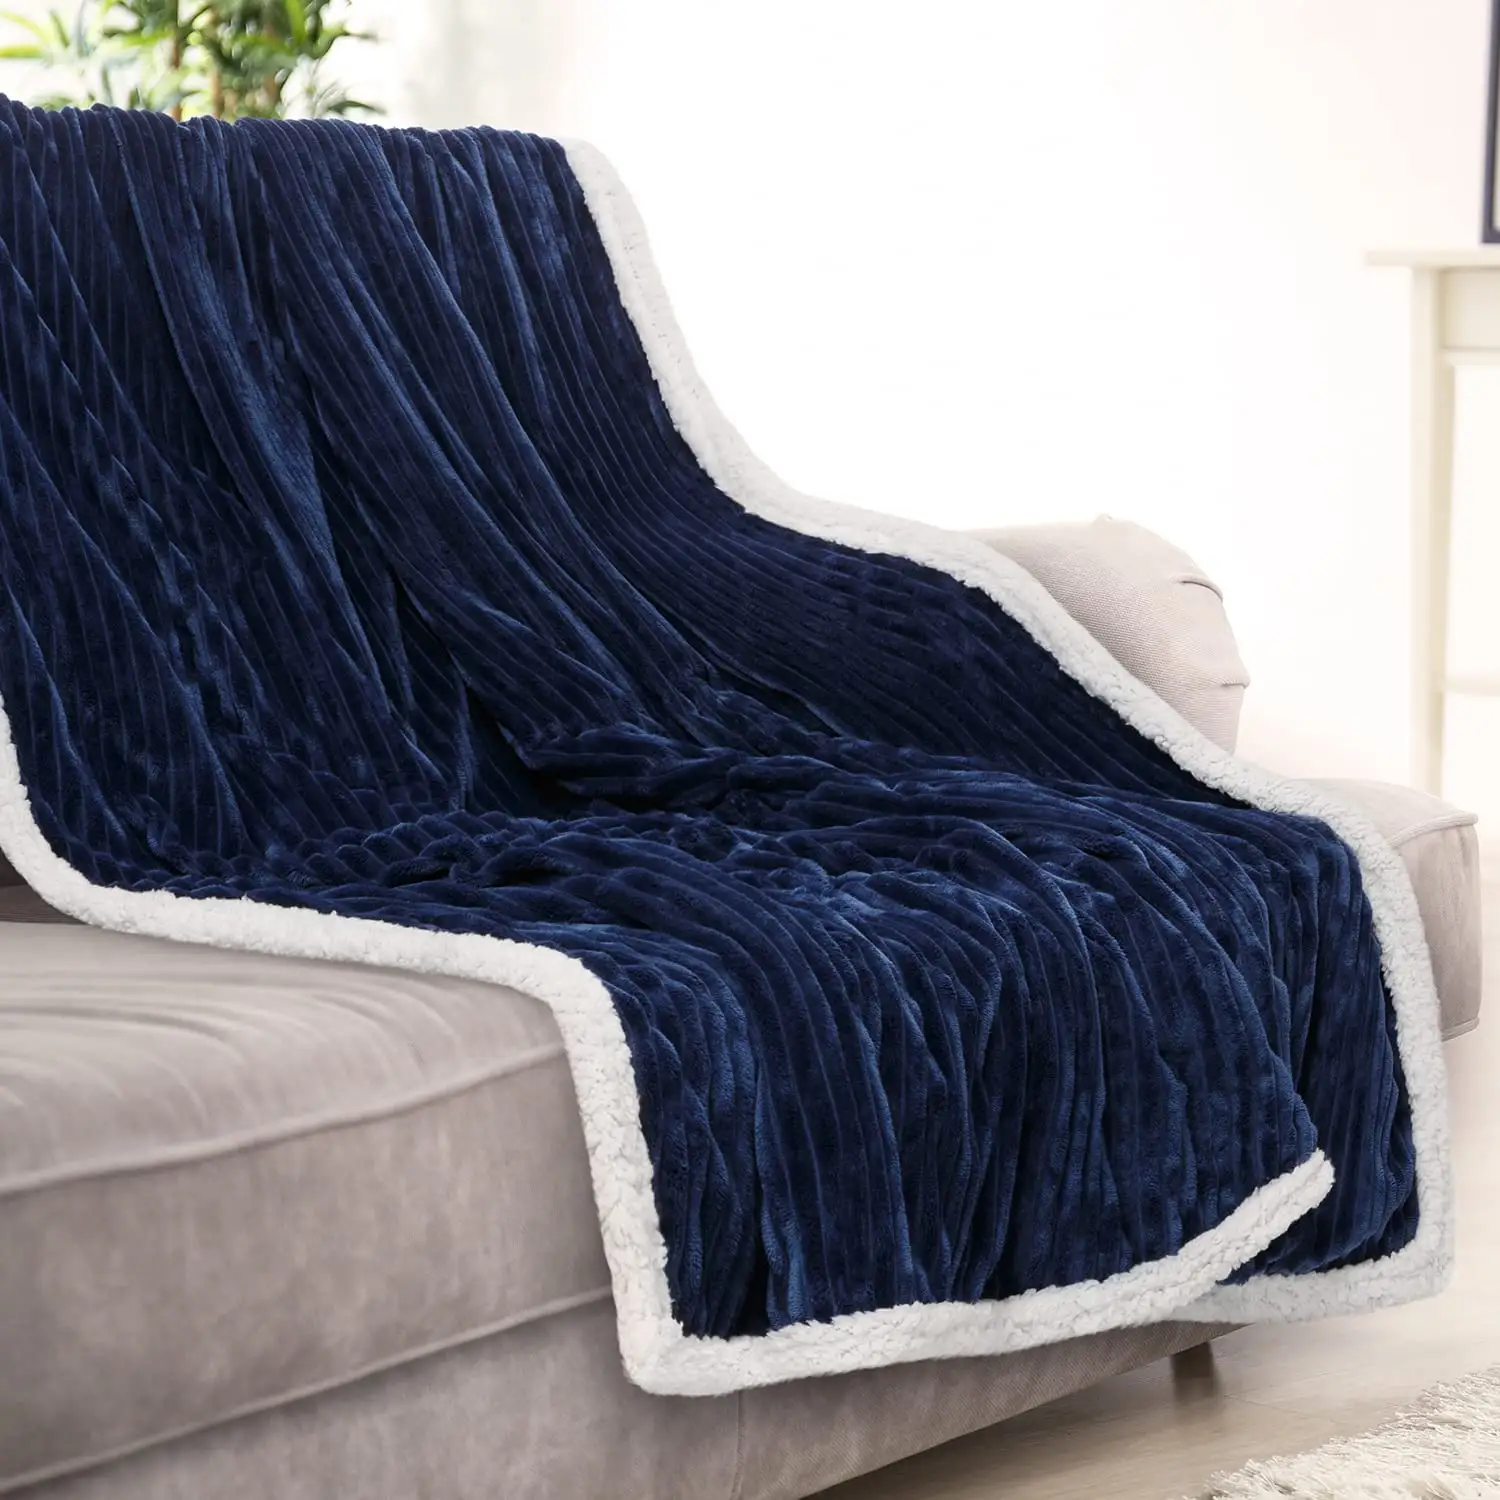 2022 New design most popular pattern Jacquard 100% cotton throw knitted Comfortable cotton blanket soft hot sell